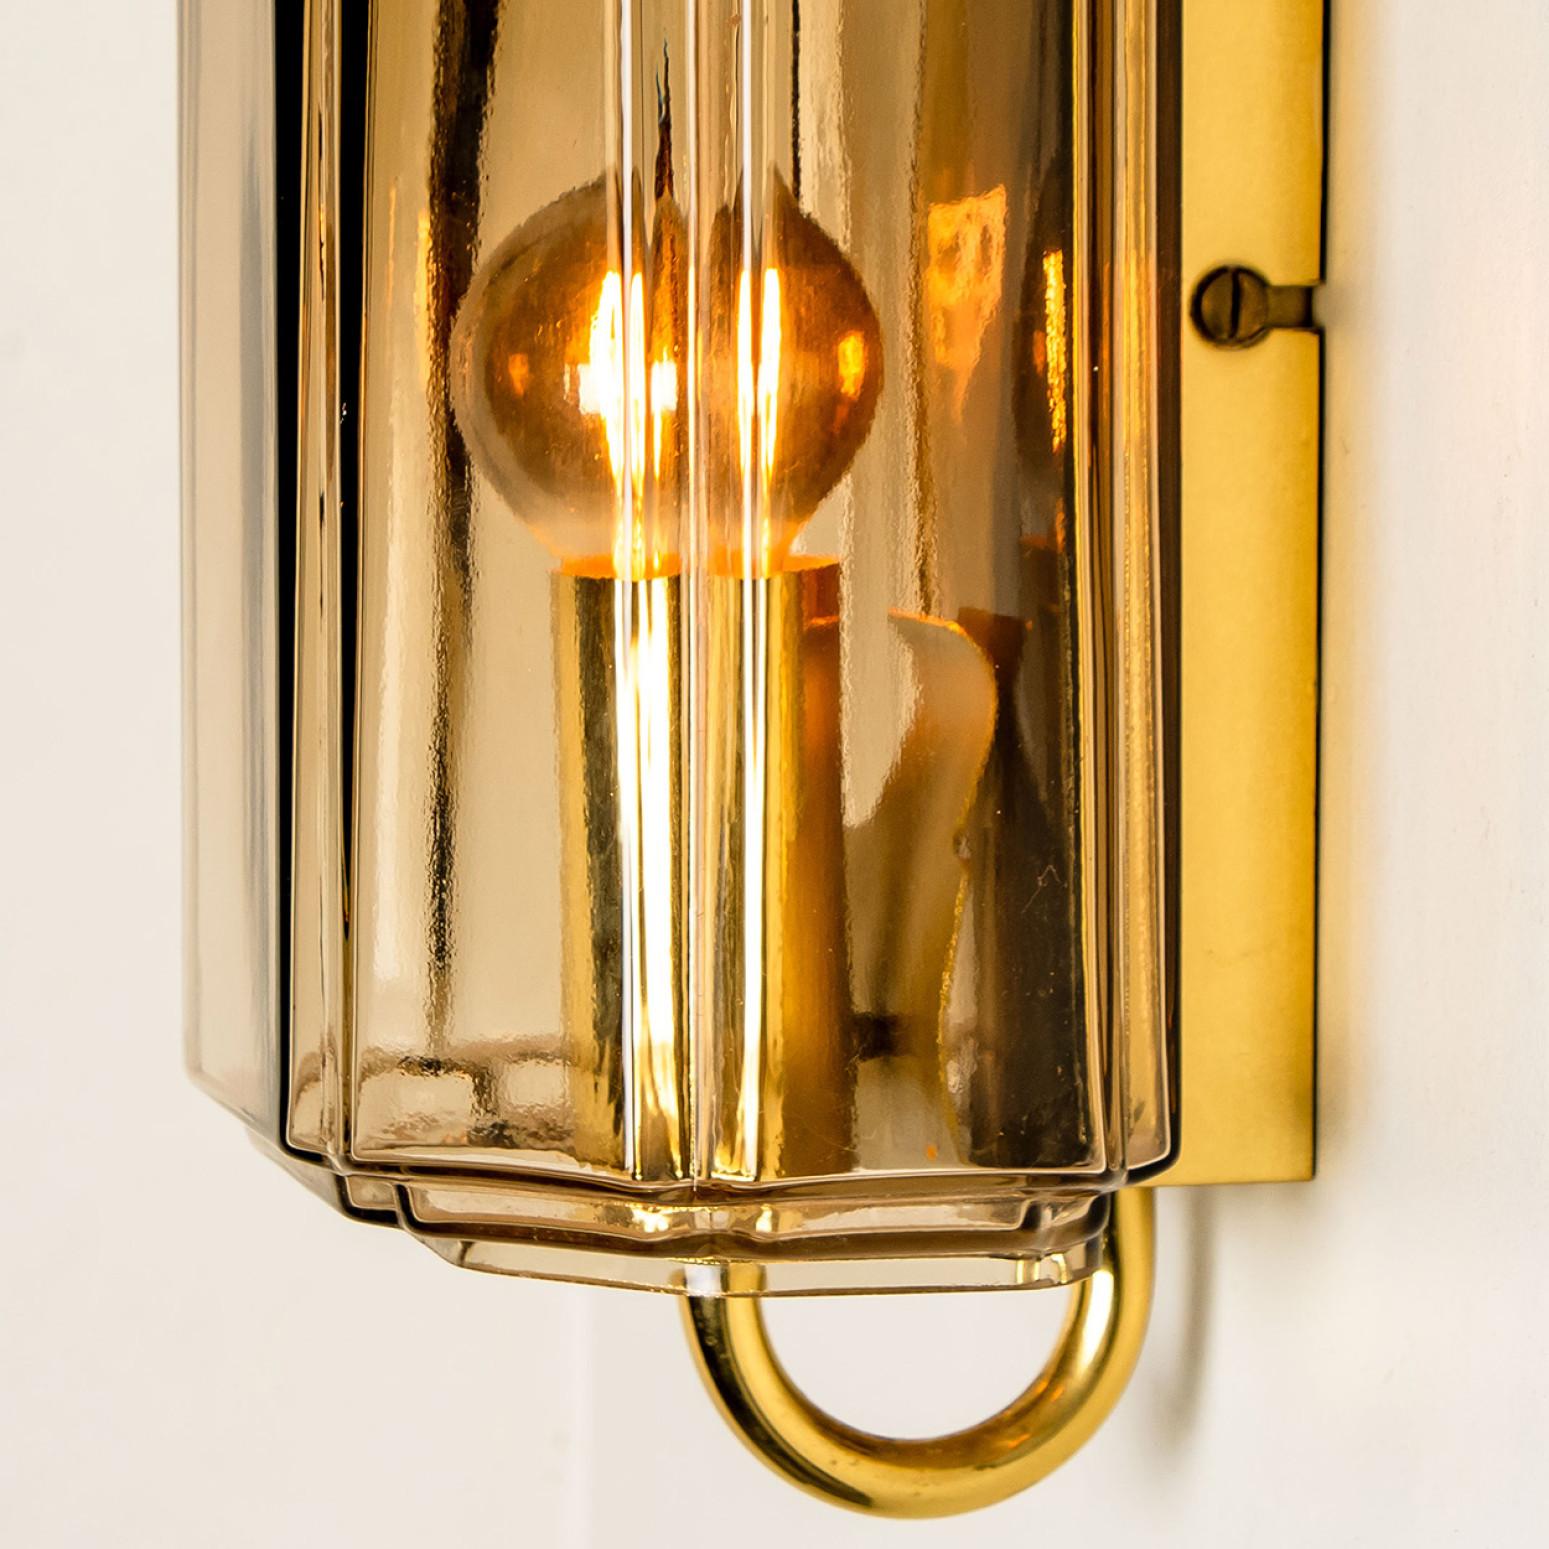 Several Smoked Glass Wall Lights Sconces by Glashütte Limburg, Germany, 1960 For Sale 5